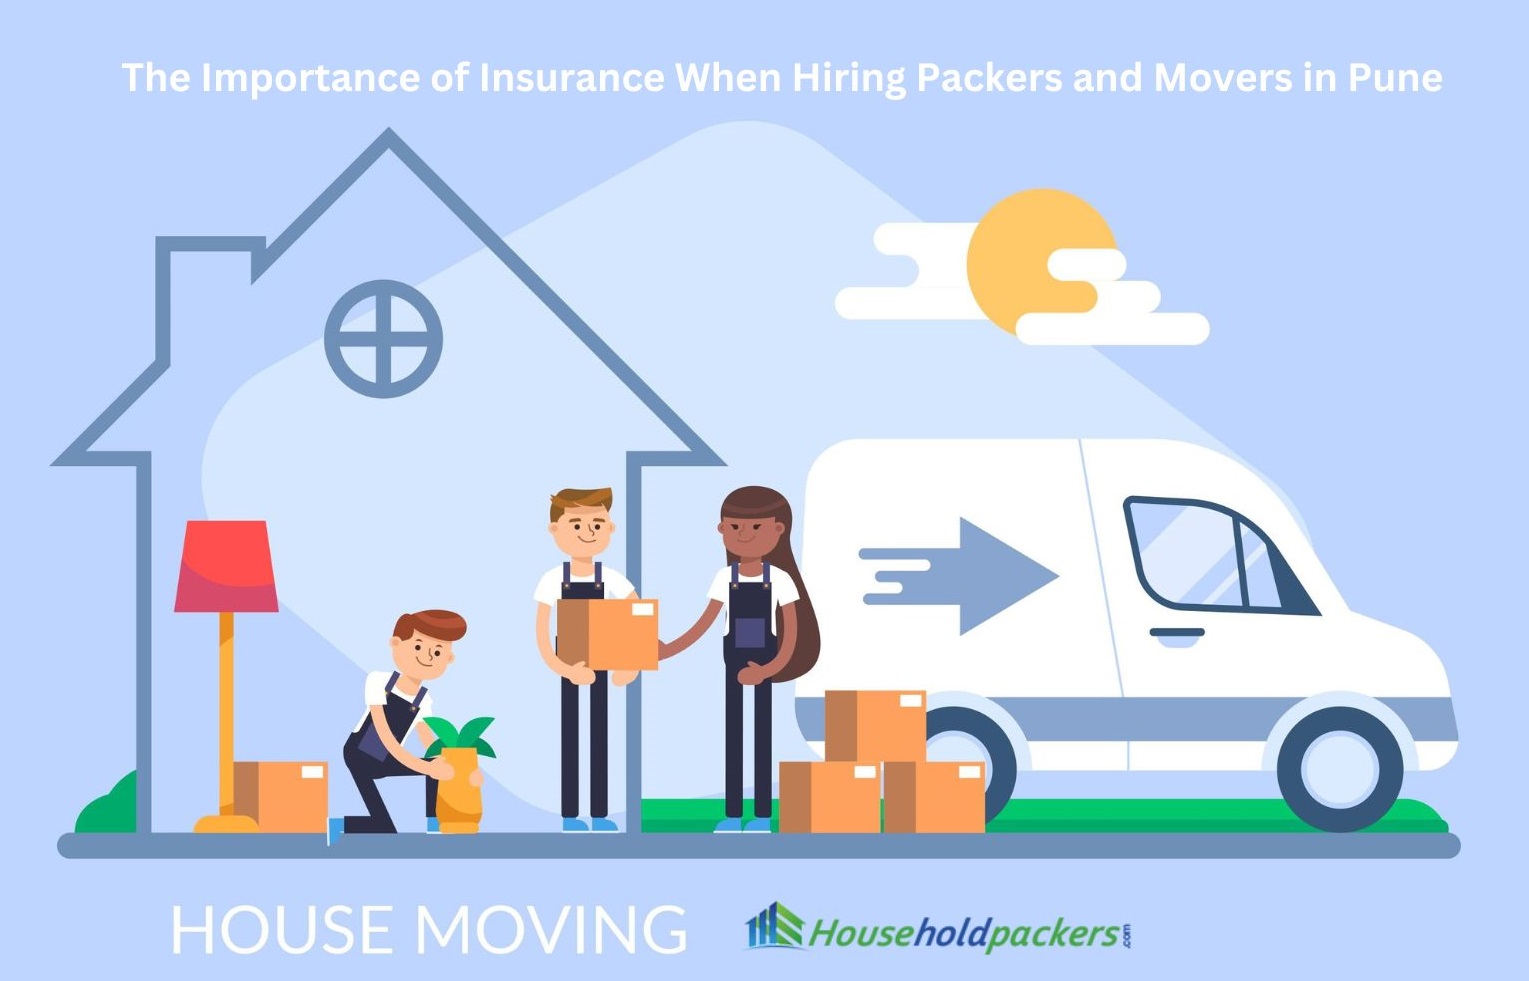 The Importance of Insurance When Hiring Packers and Movers in Pune